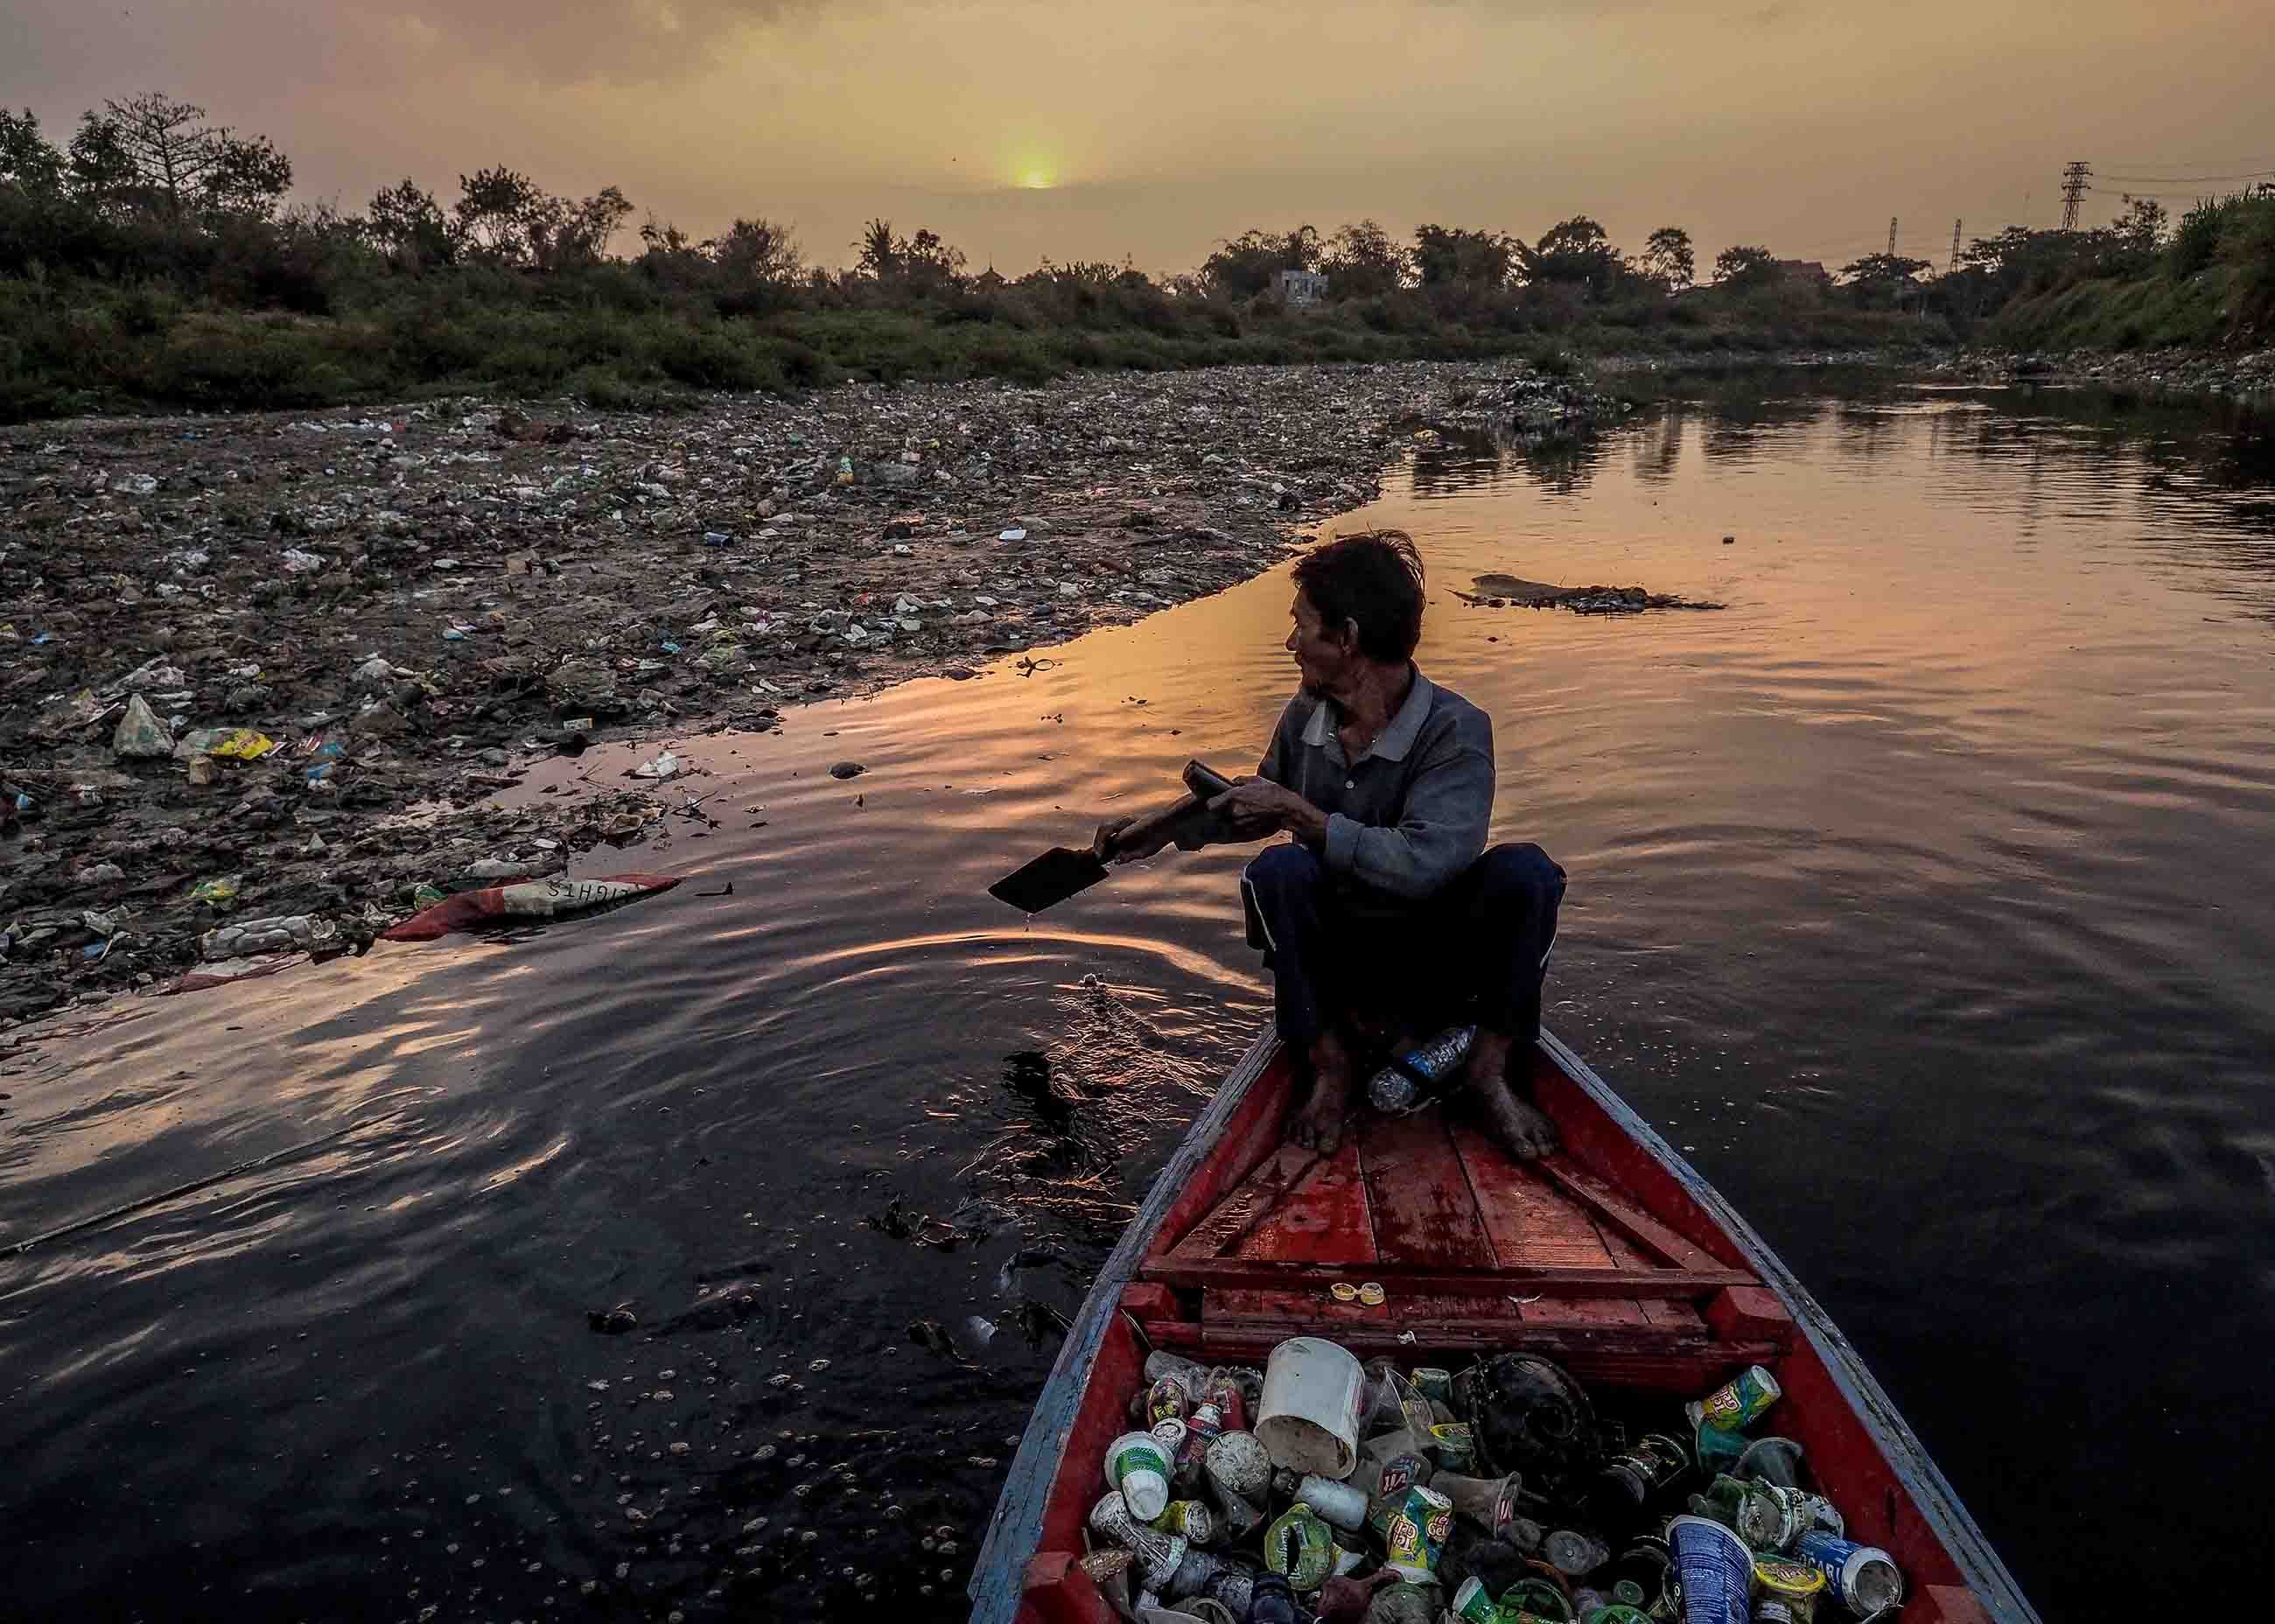 Dedi Rahman, 65, remembers swimming in the Citarum River when he was a boy. Today, the river is considered one of the world’s most polluted waterways, contaminated by factory effluent, sewage and trash. Rahman gathers cans and bottles to recycle for cash. Image by Larry C. Price. Indonesia, 2016.